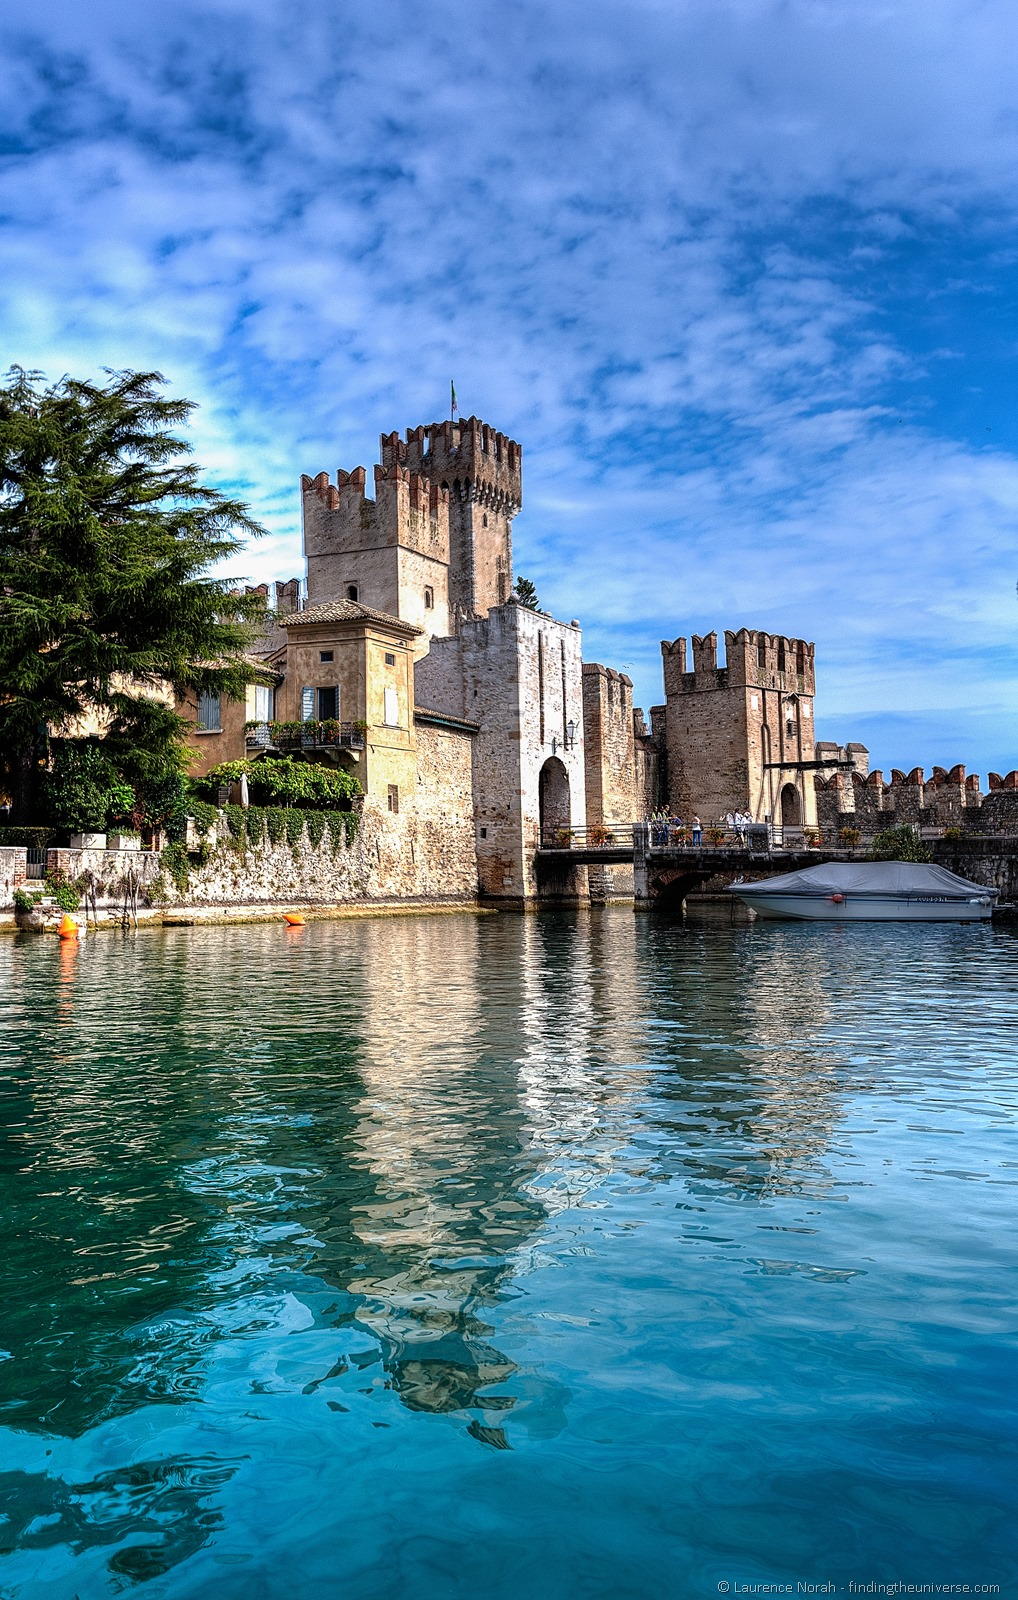 [Scaliger%2520castle%2520from%2520moat%2520reflection%2520italy%2520garda%2520lake%255B3%255D.jpg]